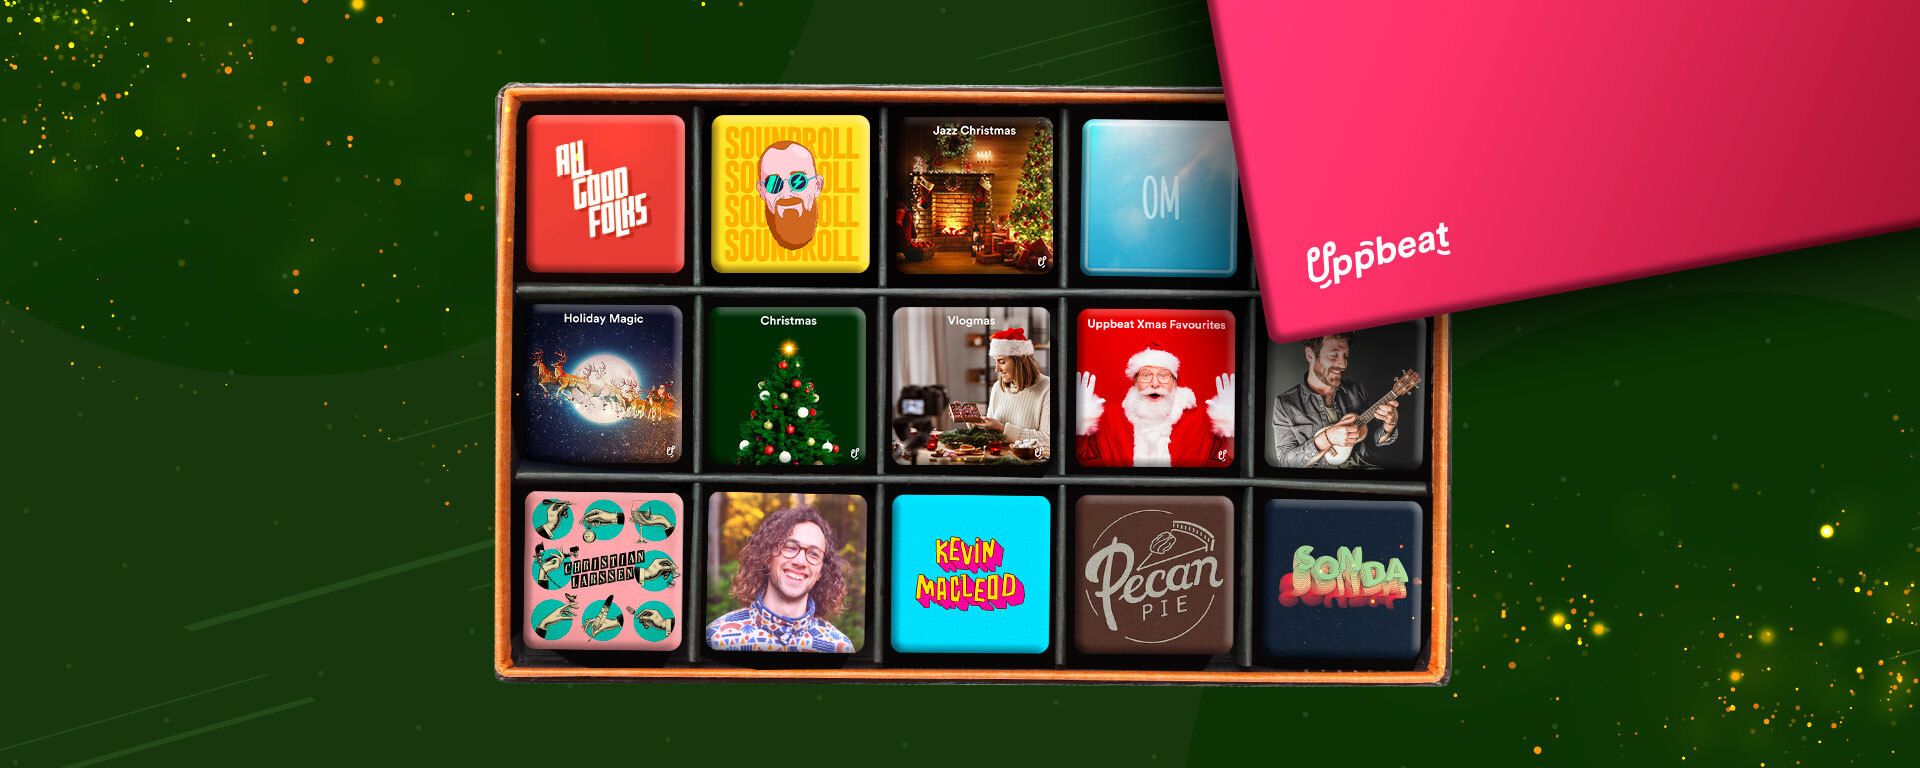 An illustration of a selection box containing different Uppbeat copyright-free music artists